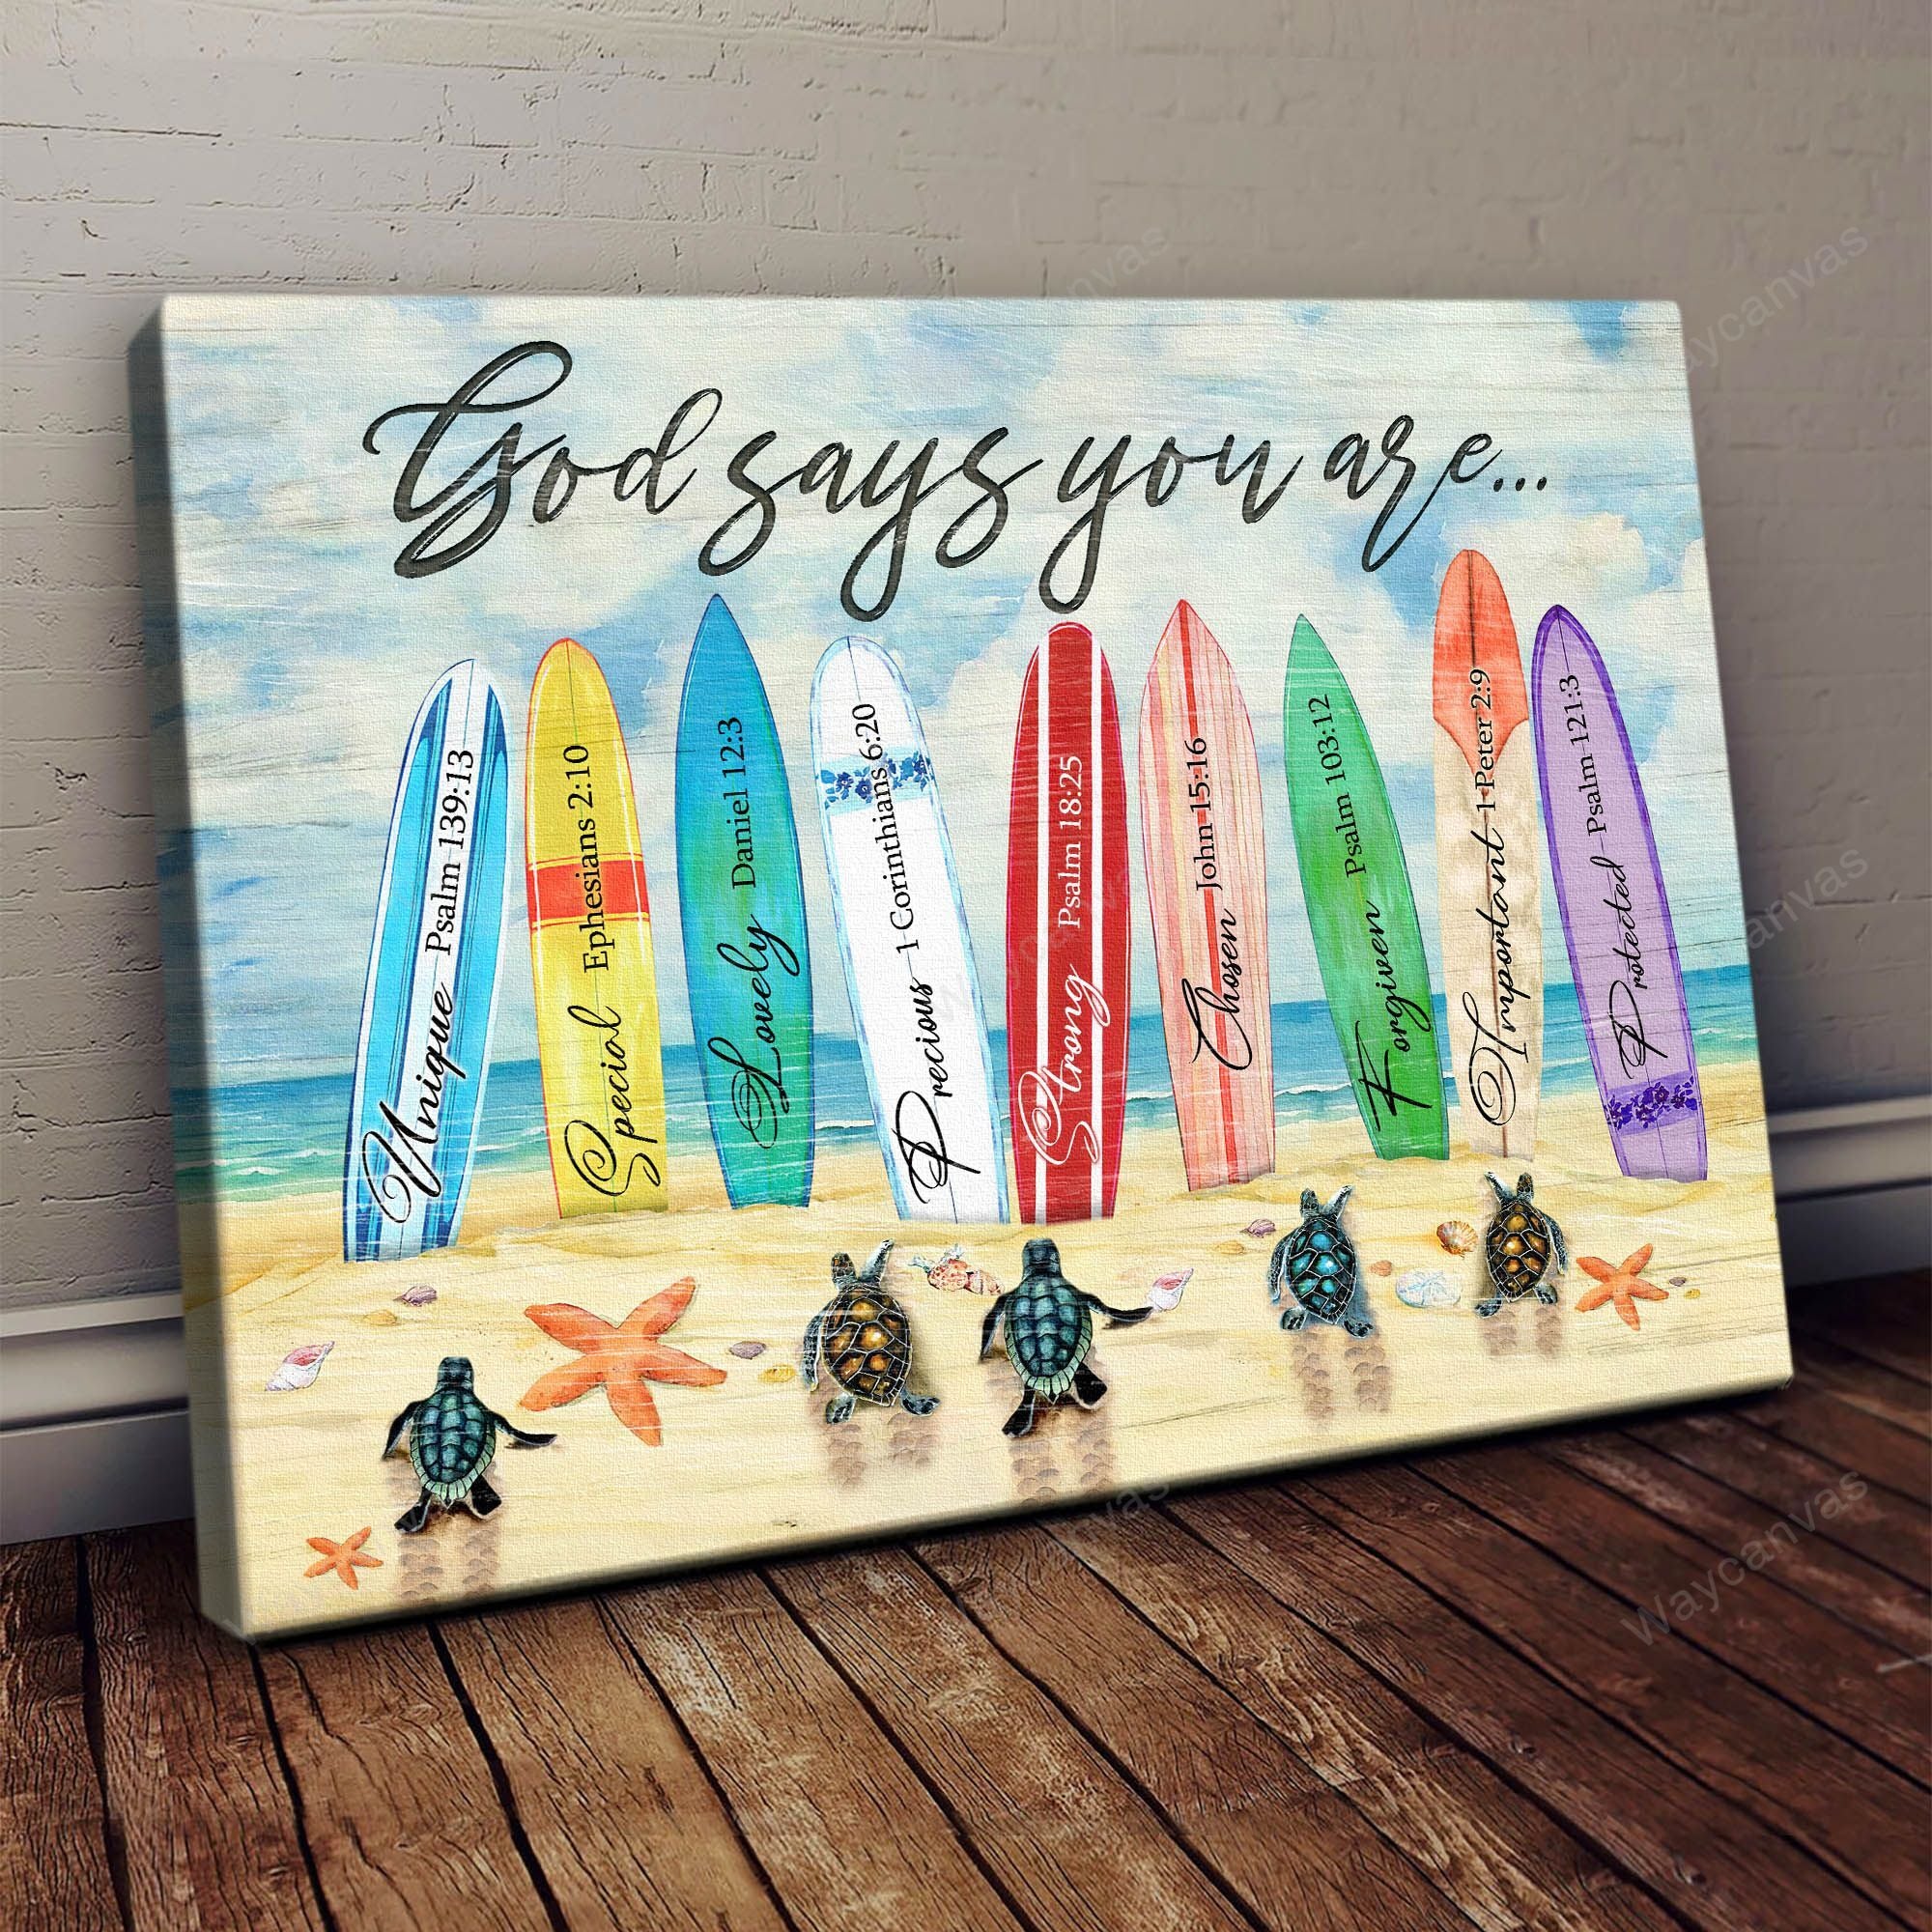 Turtle, On the beach, Surfboard, God says you are - Jesus Landscape Canvas Prints, Wall Art